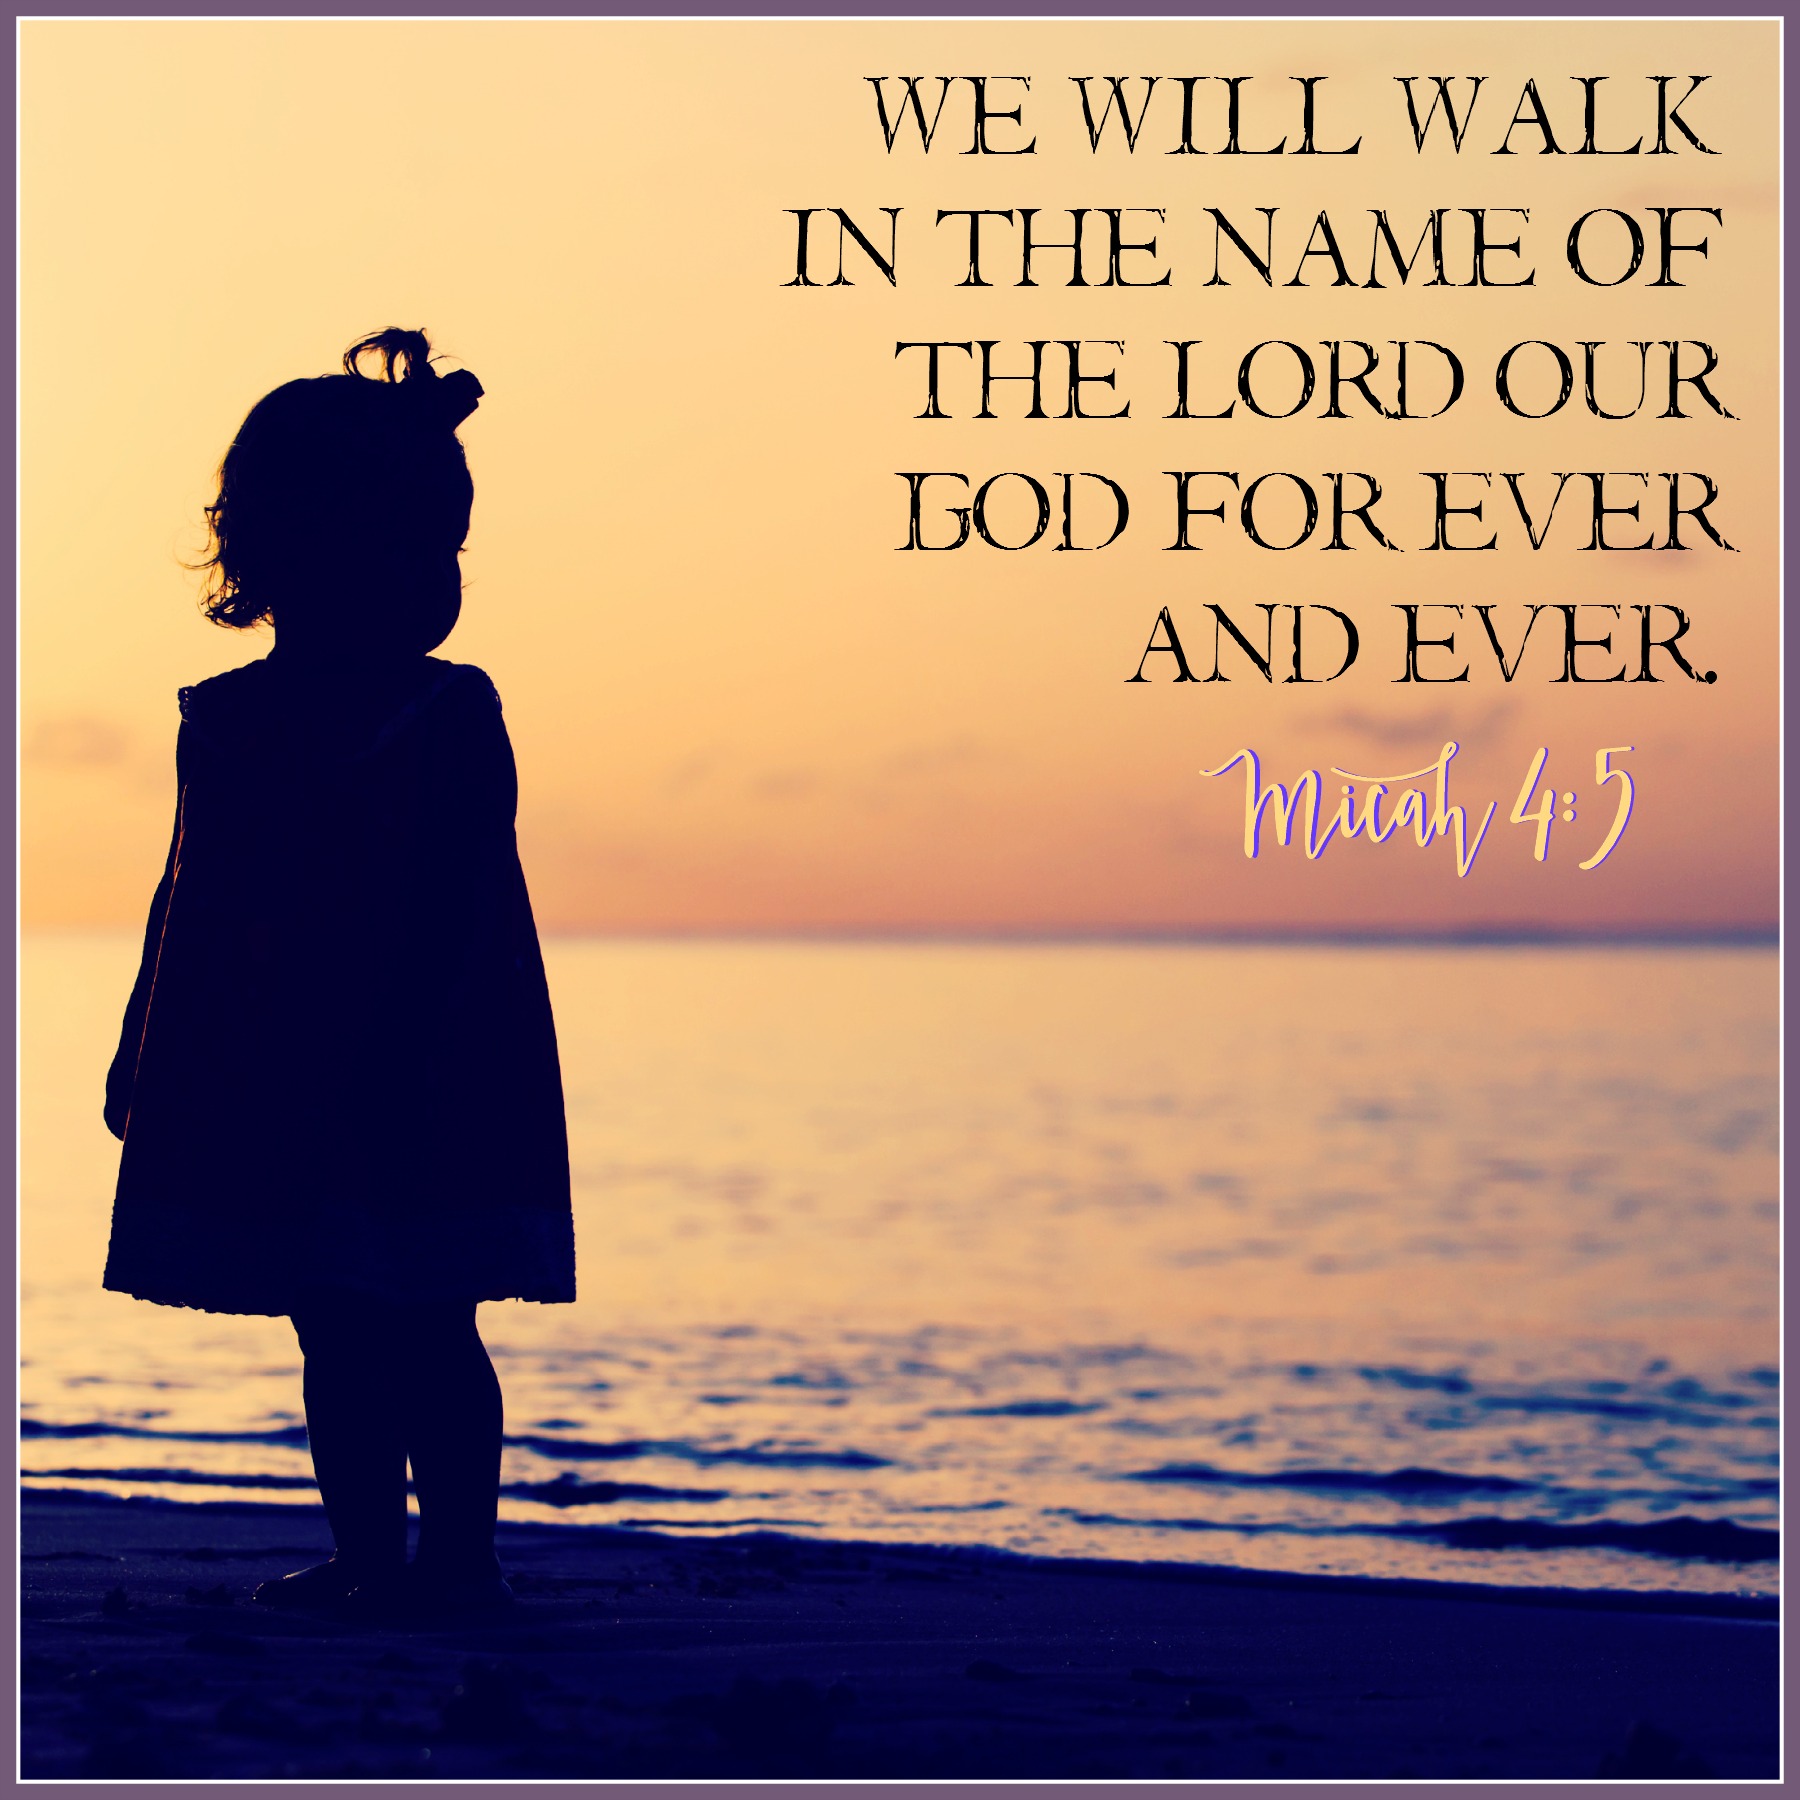 Prepare The Way Of The Lord (4)